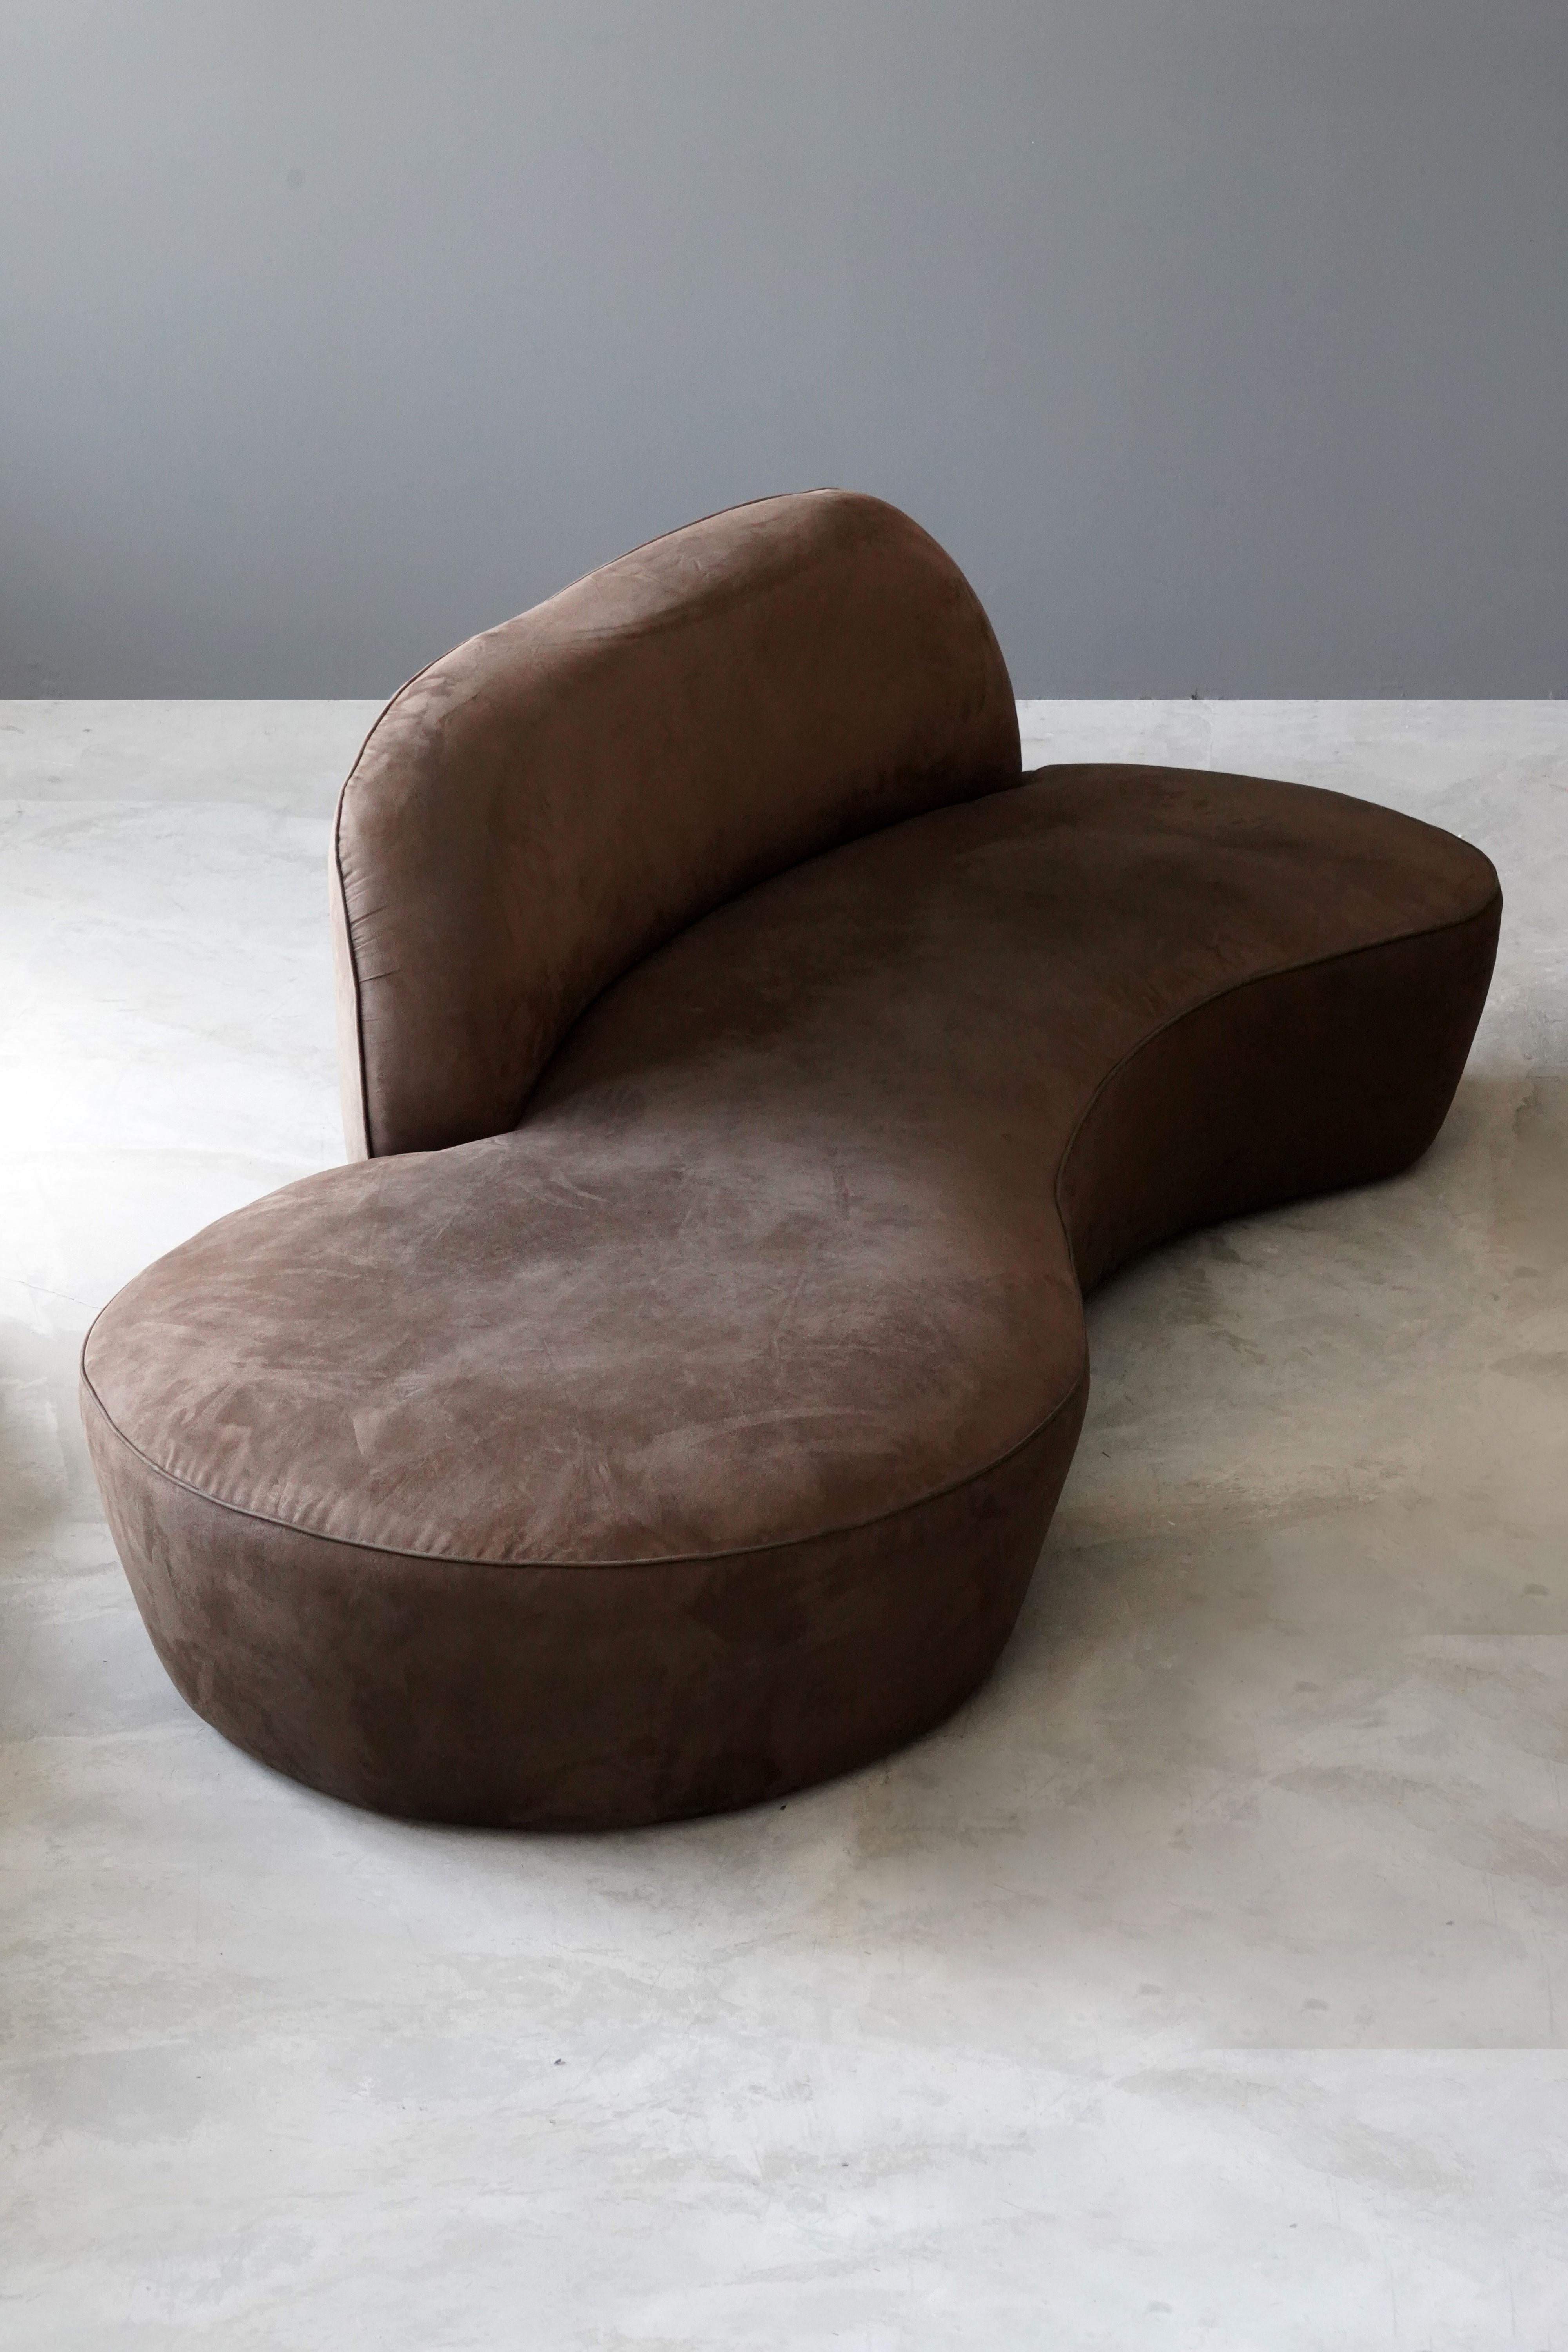 A Vladimir Kagan sofa in it's original brown velvet with a form referencing the early organic design movement. Comfortable backrest. Rare version executed in limited numbers for room and board. Replacing reupholstery is advised upon